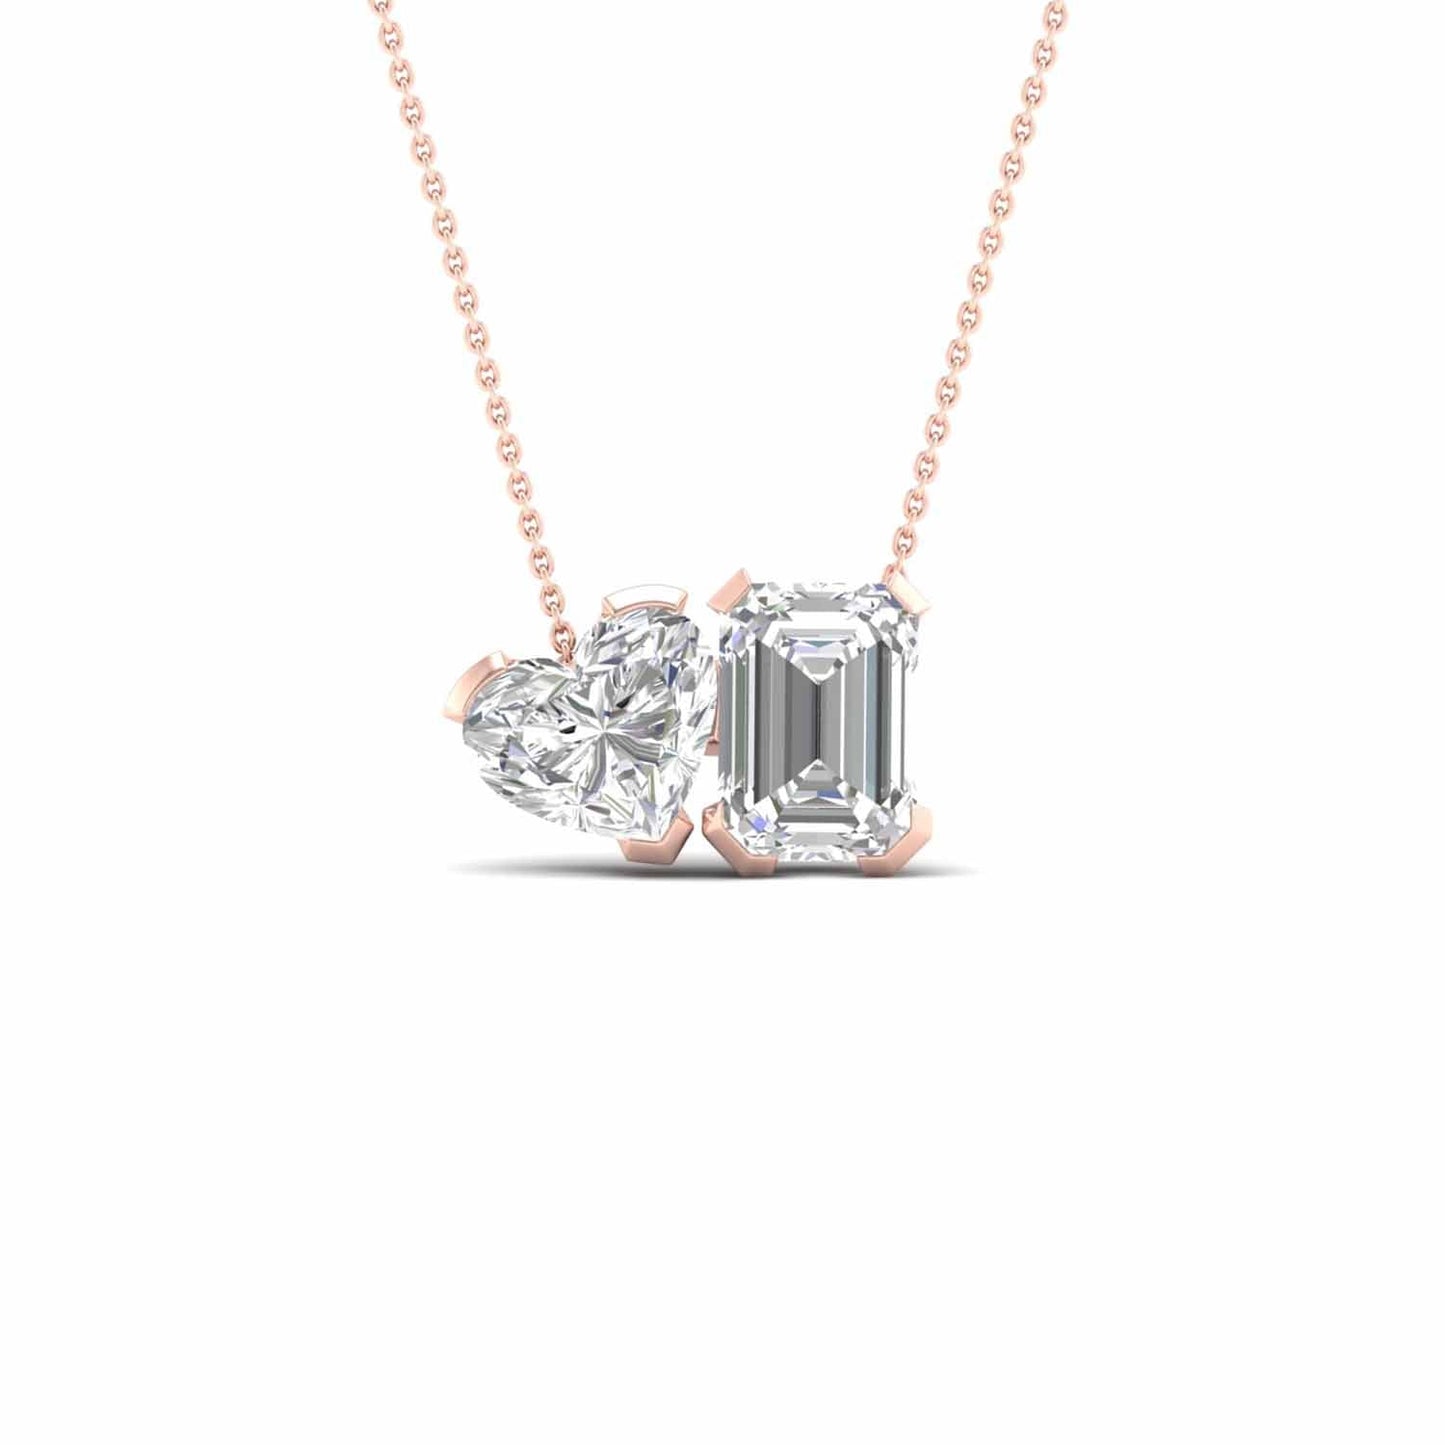 Atmos Heart Emerald Diamond Two-Stone Necklace_Product Angle_PCP Main Image